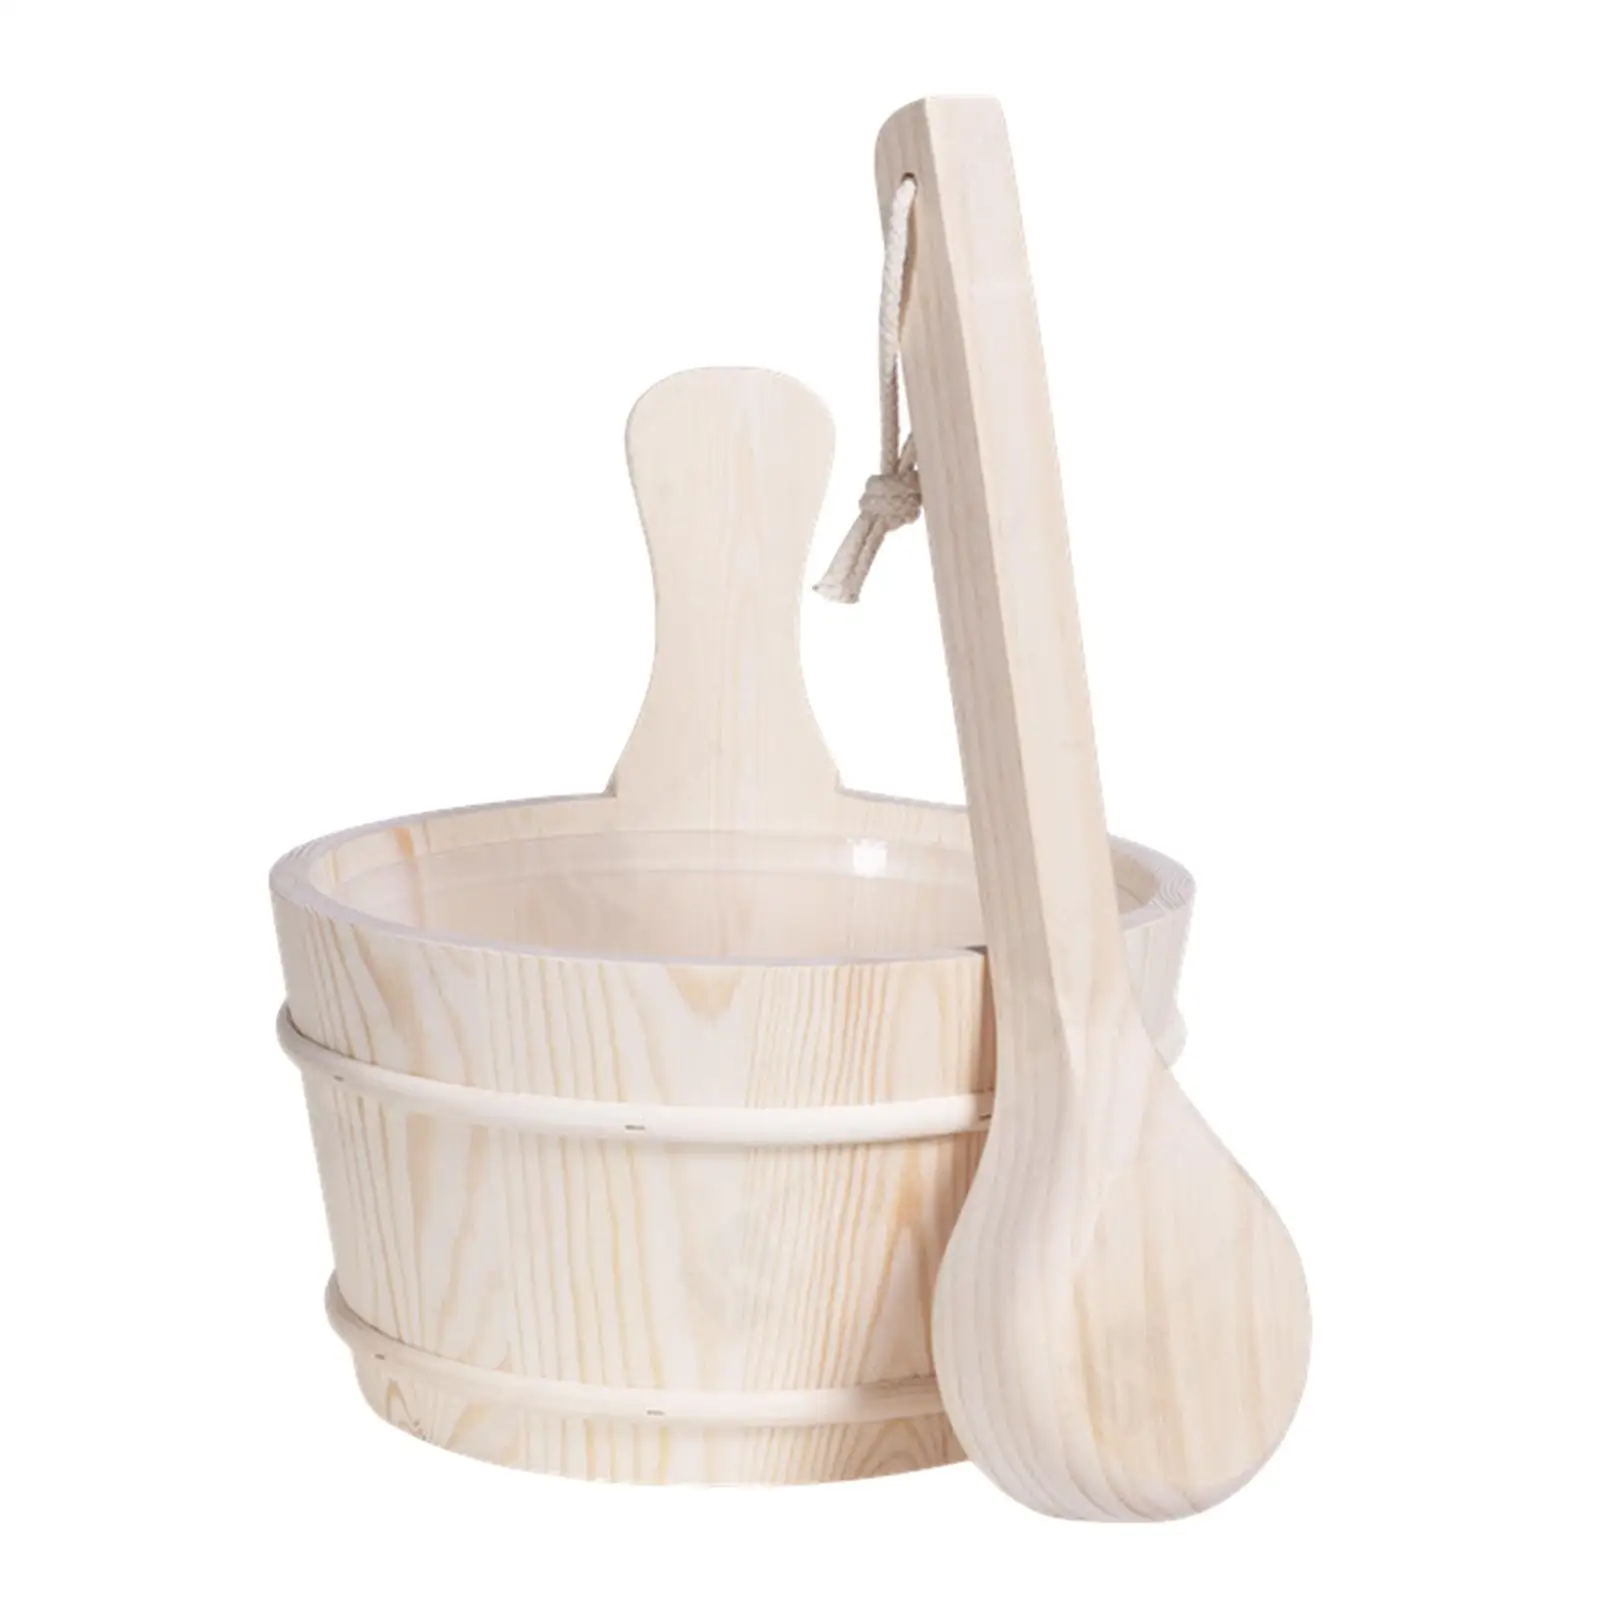 Sauna Wooden Bucket and Ladle Kit, Sauna Accessories with Liner for 